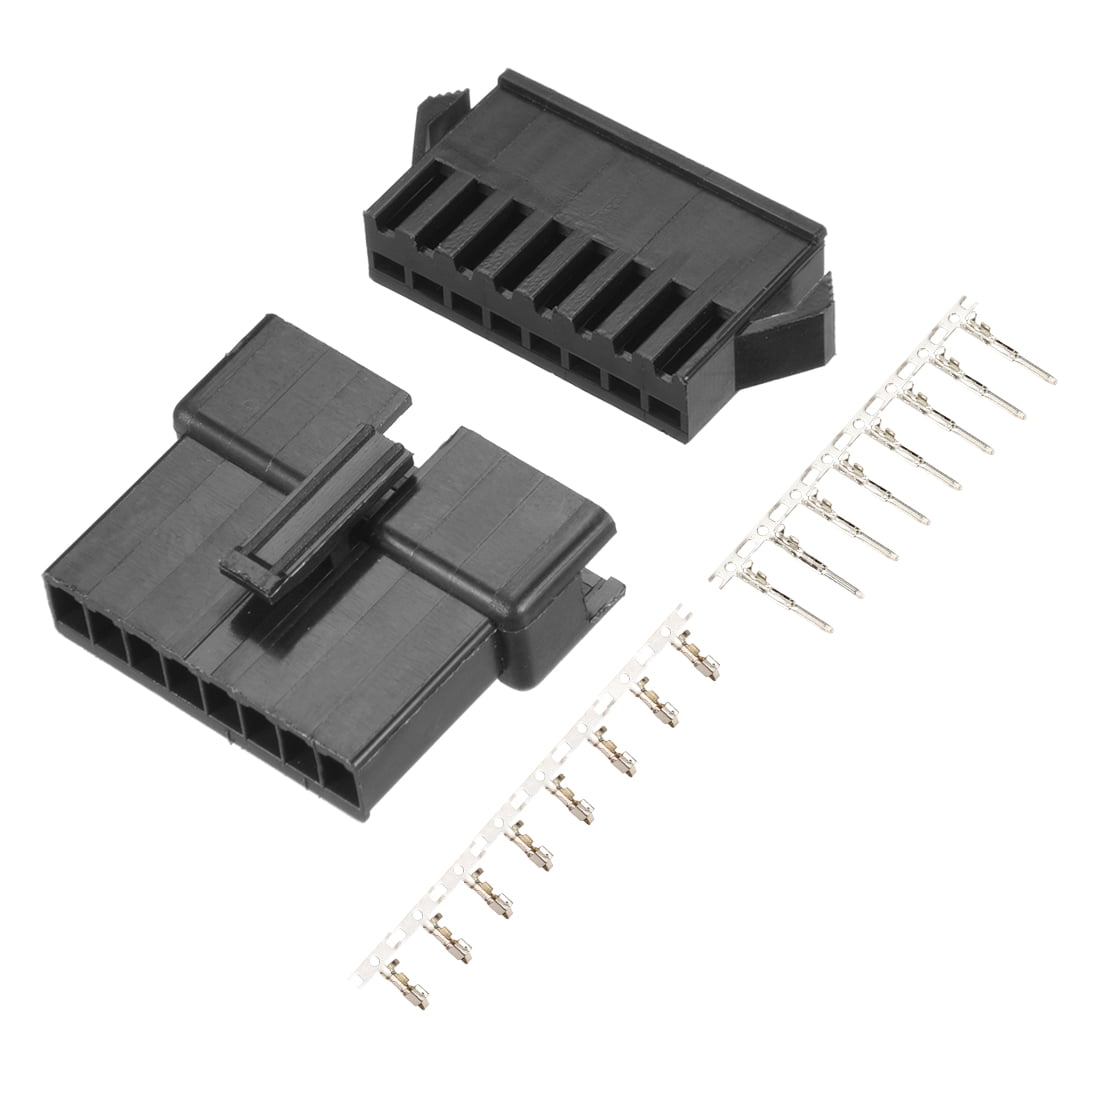 10 Sets Jst 2.5mm SM 8-Pin Male  Female Connector Plug With Wire Cable 